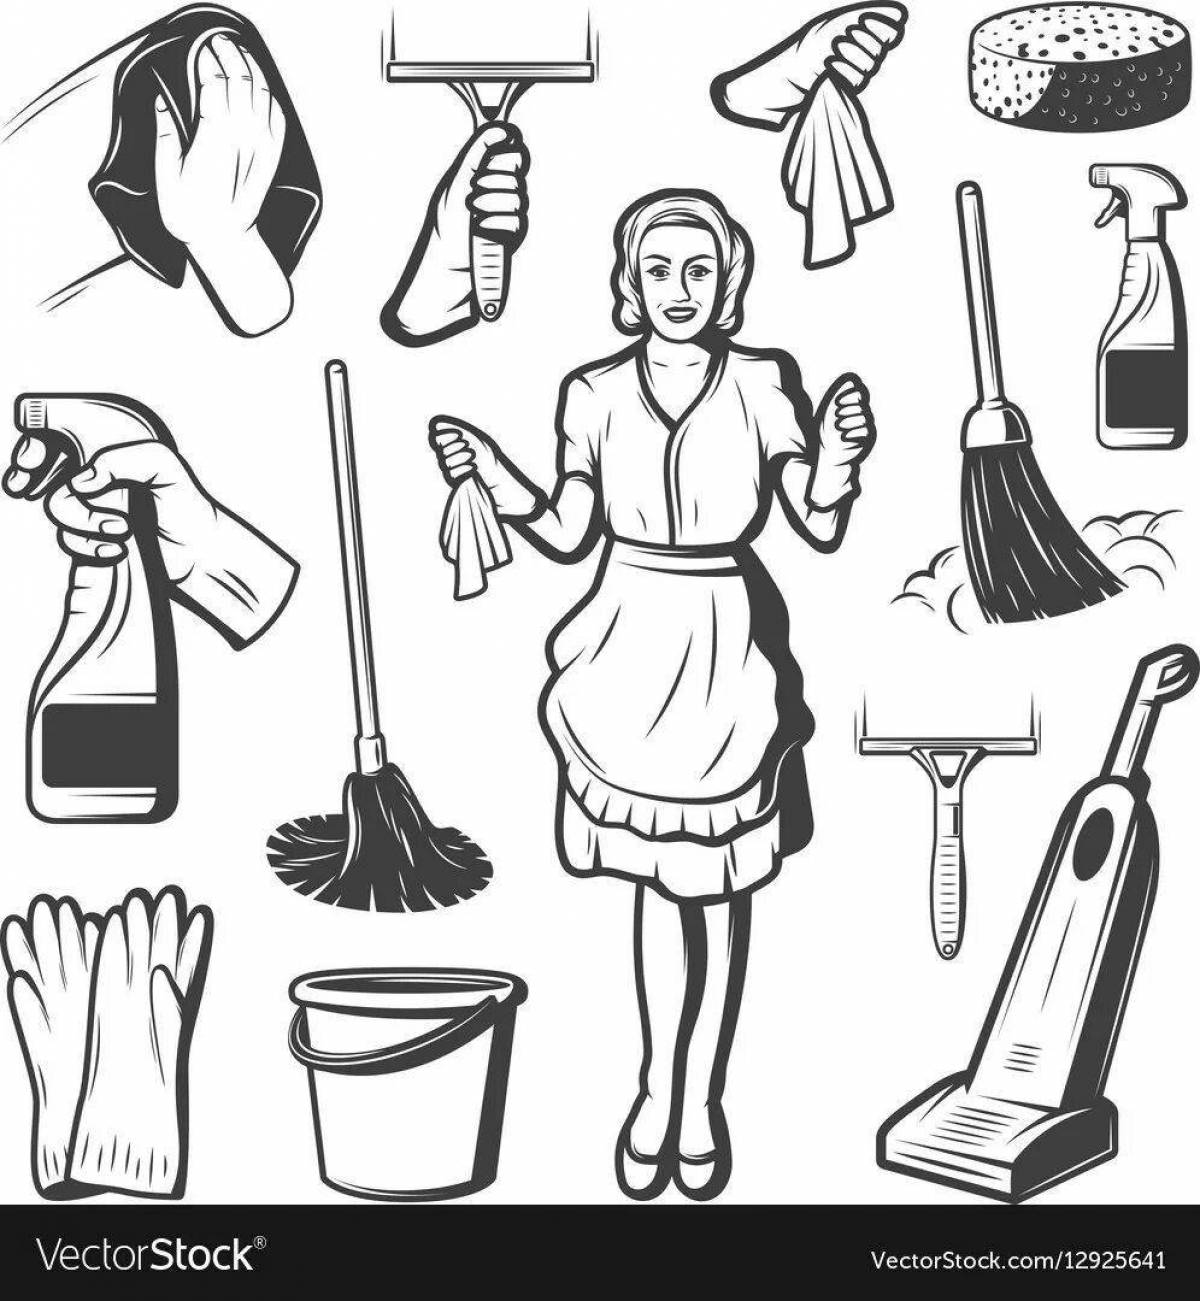 Coloring page charming housewife